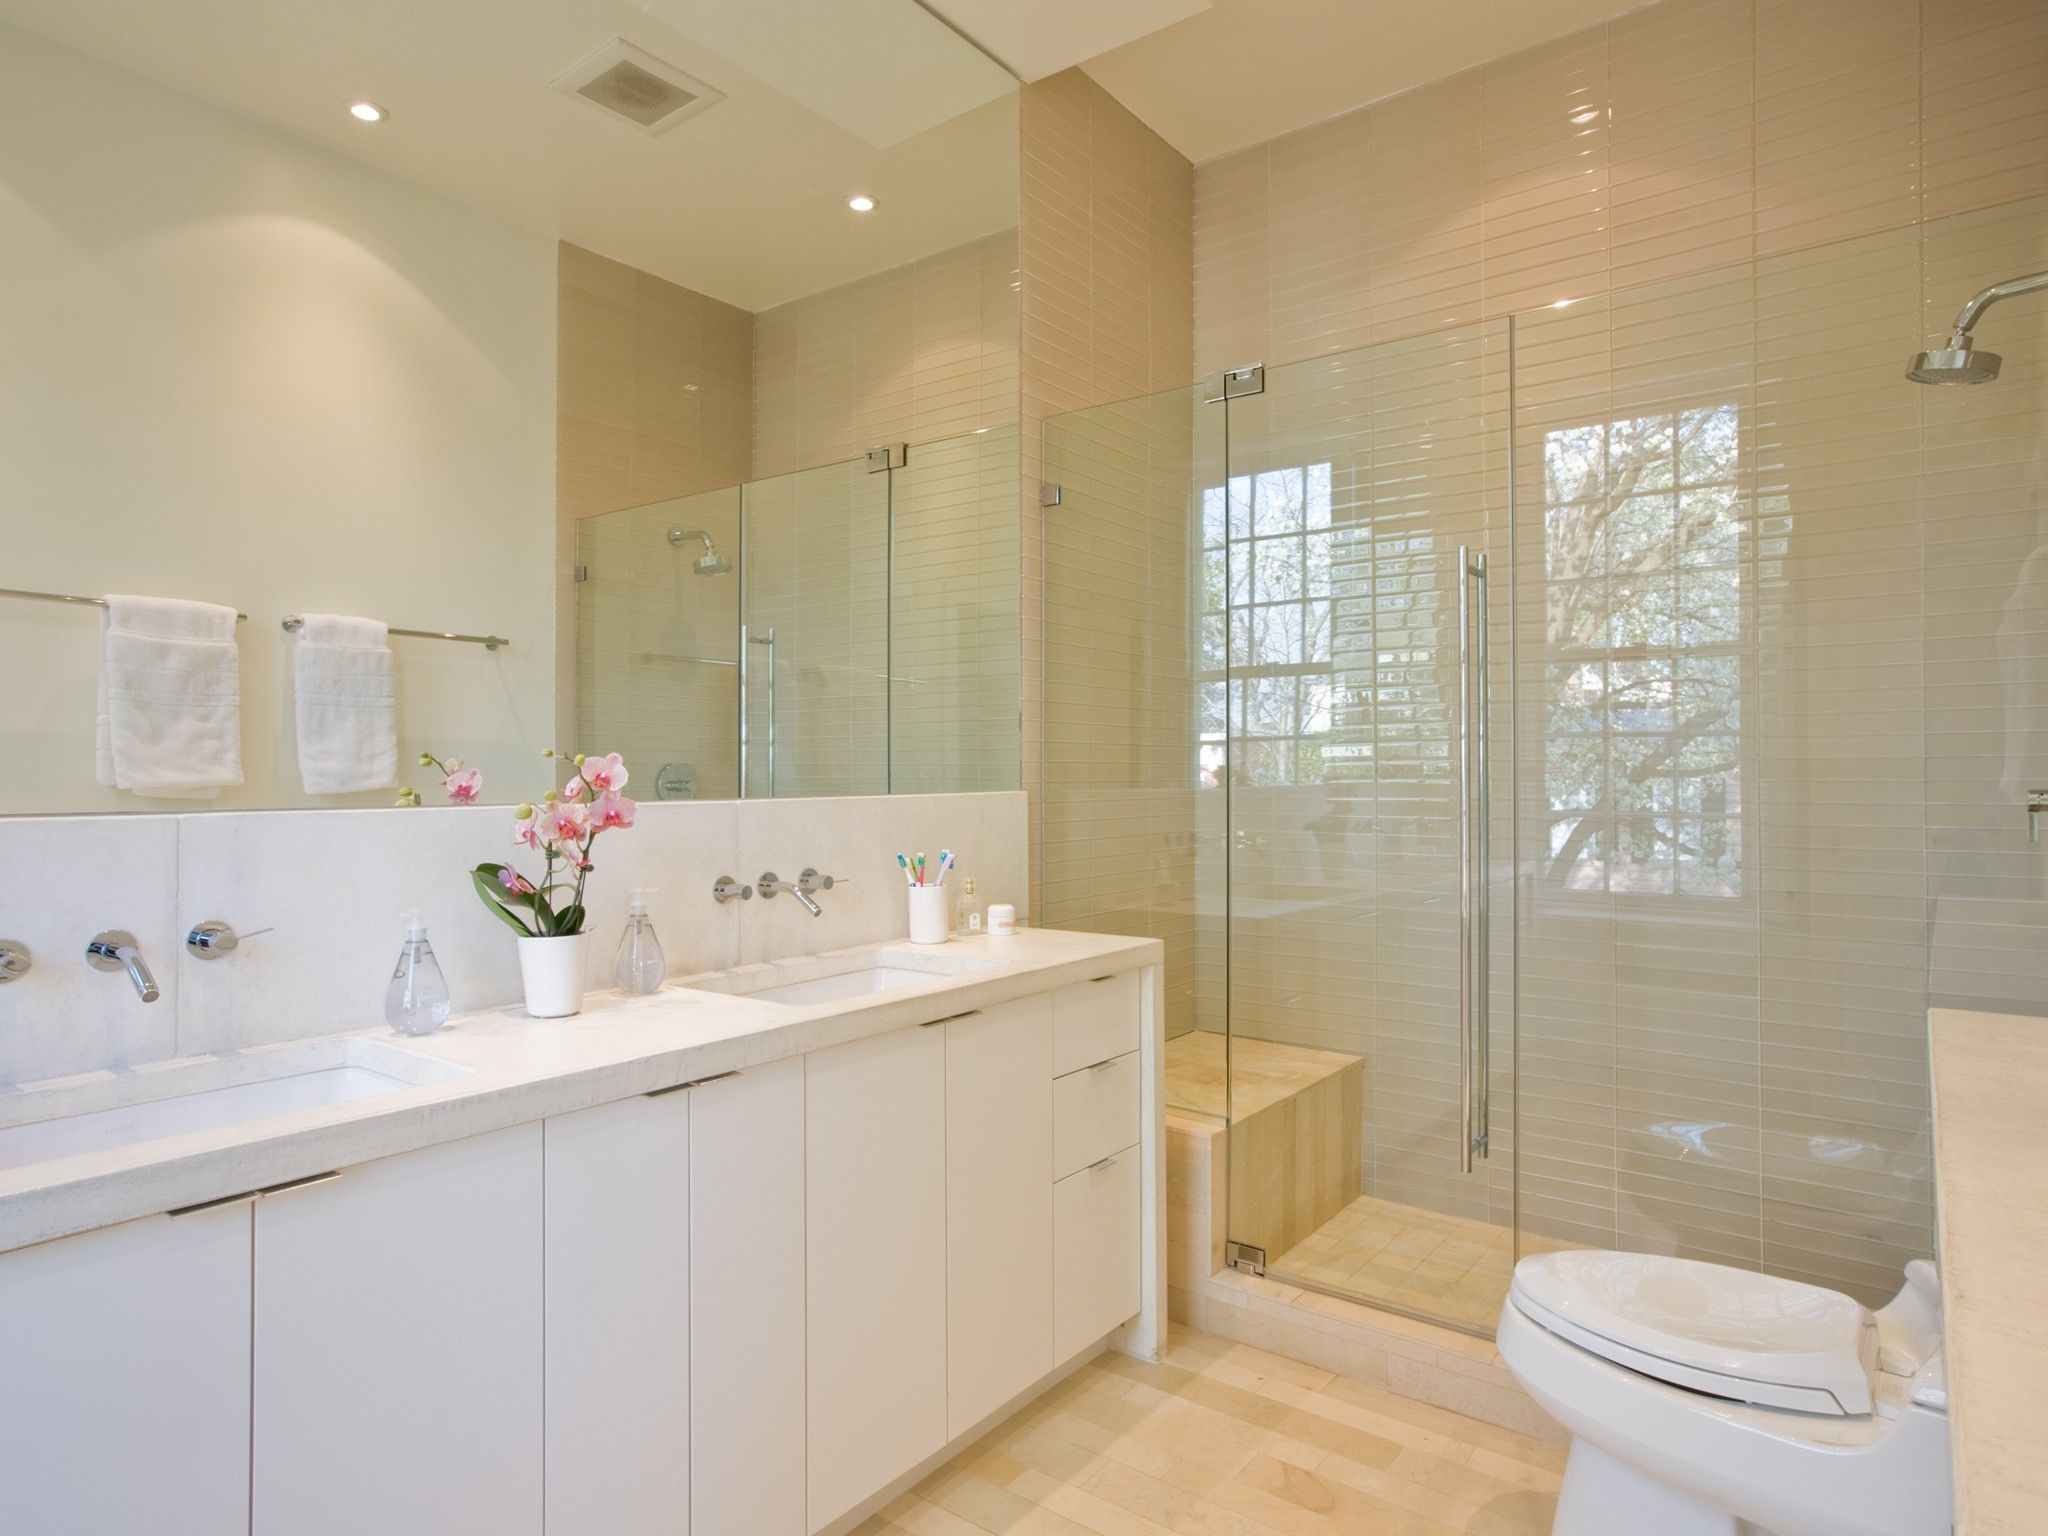 Stunning Glass Walk In Shower Features Sleek Tile Covering The Entire Wall (View 21 of 29)